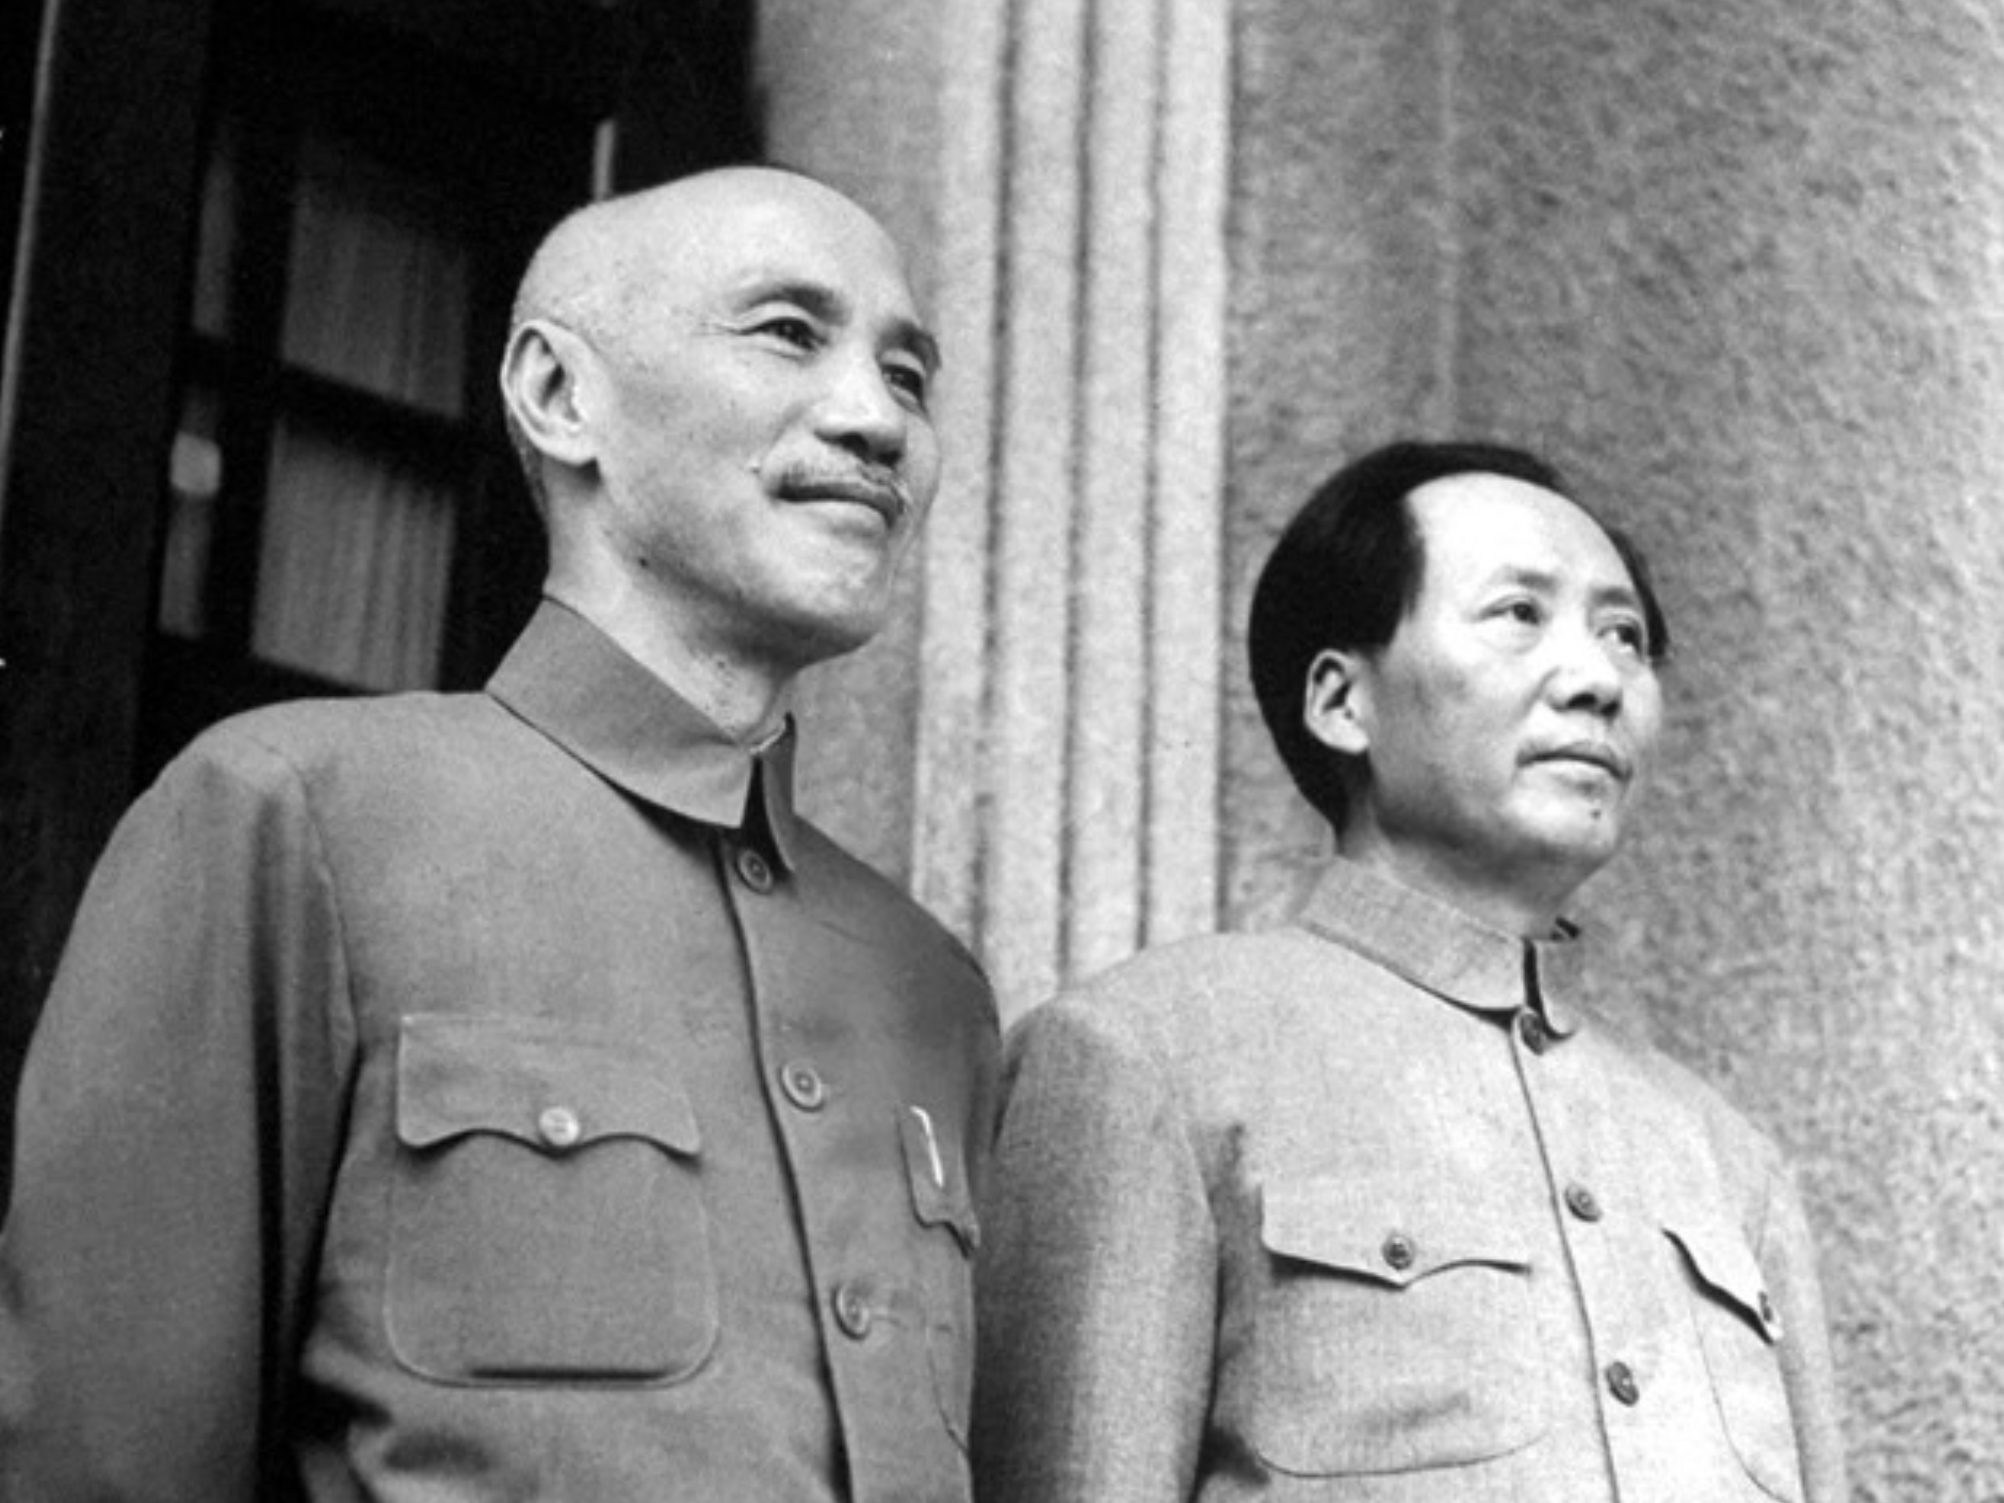 While China’s Peace Settlement Failed and the Communists Rose: A 1947 Assessment